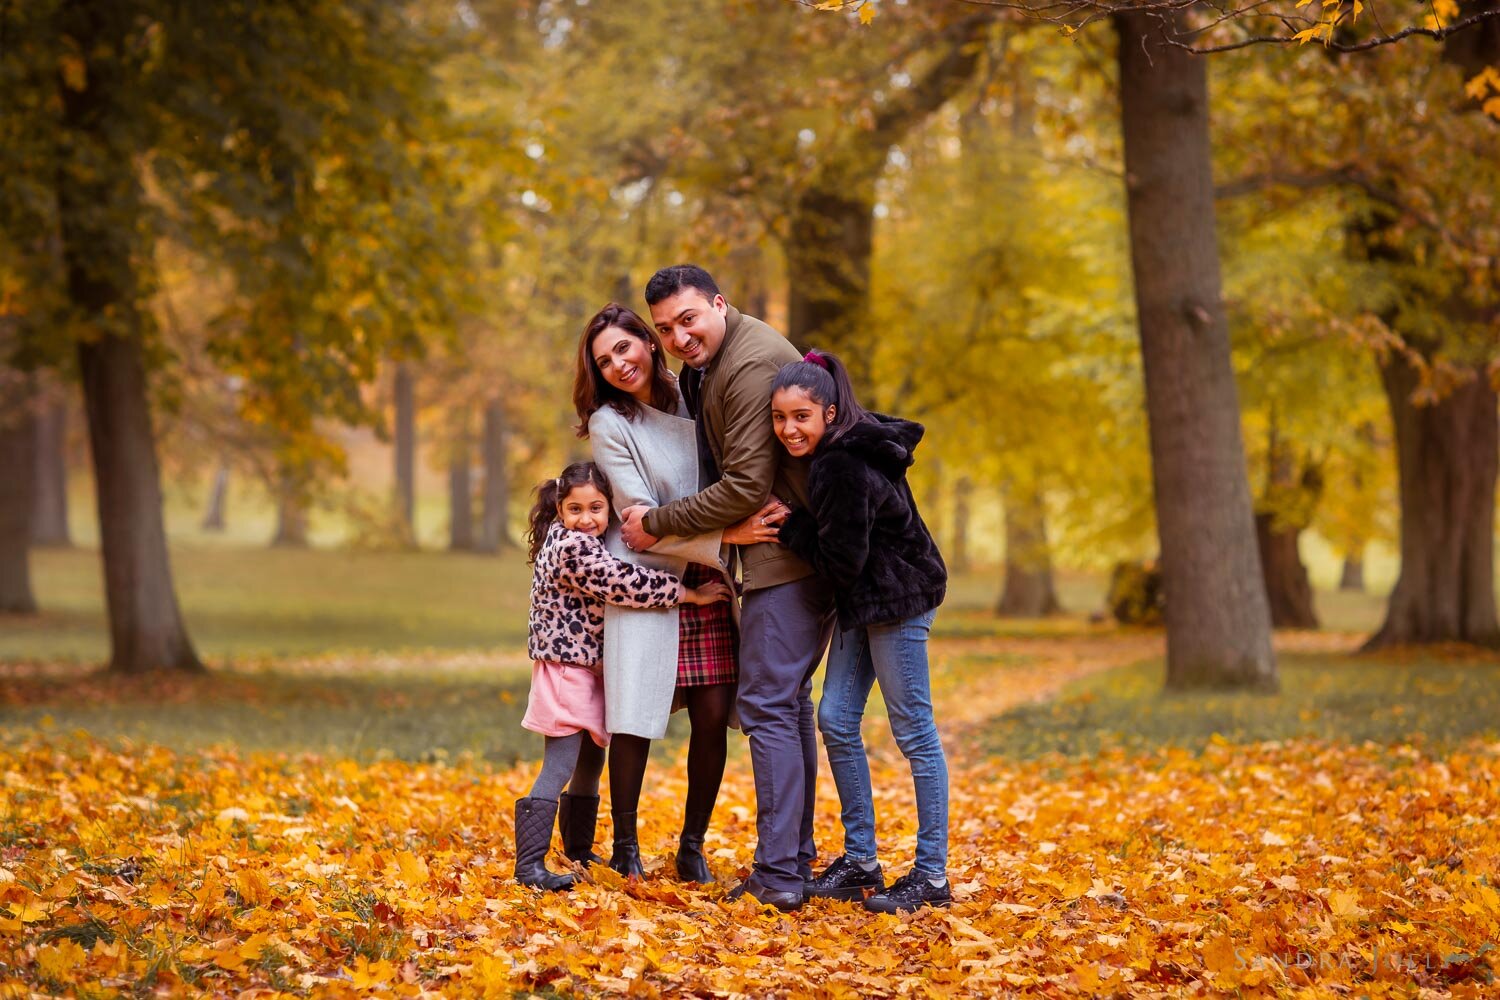 autumn-family-photo-session-at-Ulriksdals-Slott-by-sandra-jolly.jpg